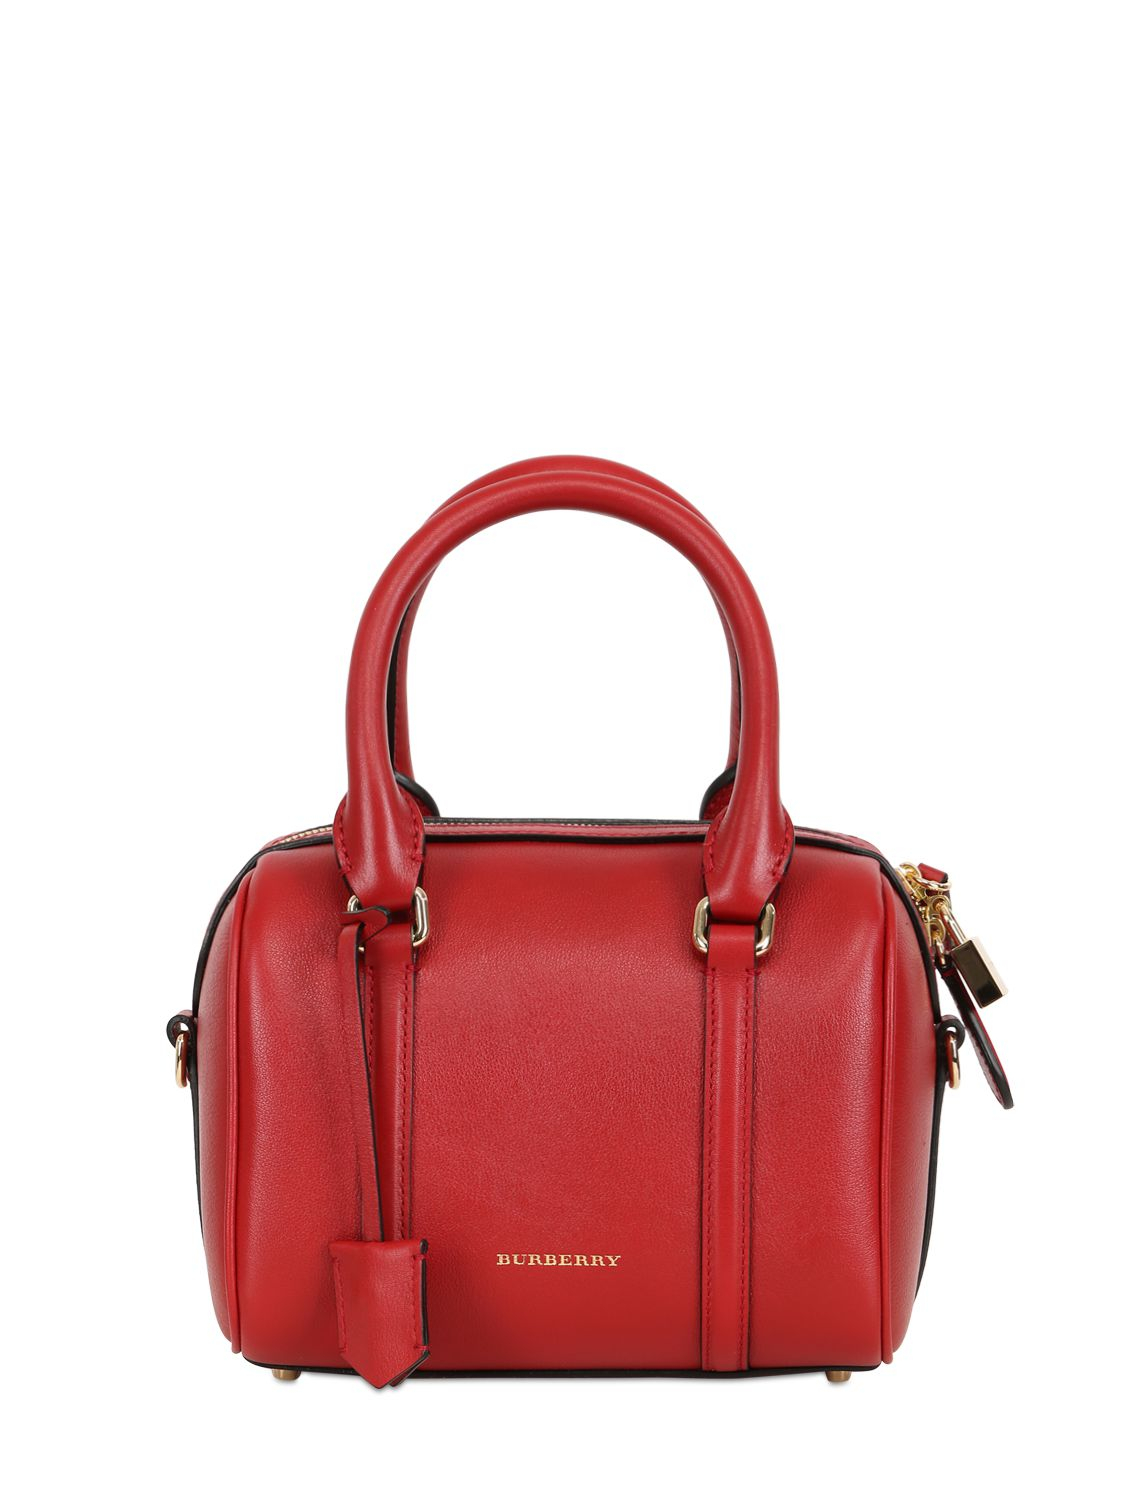 Lyst - Burberry Small Alchstrarm Leather Top Handle Bag in Red